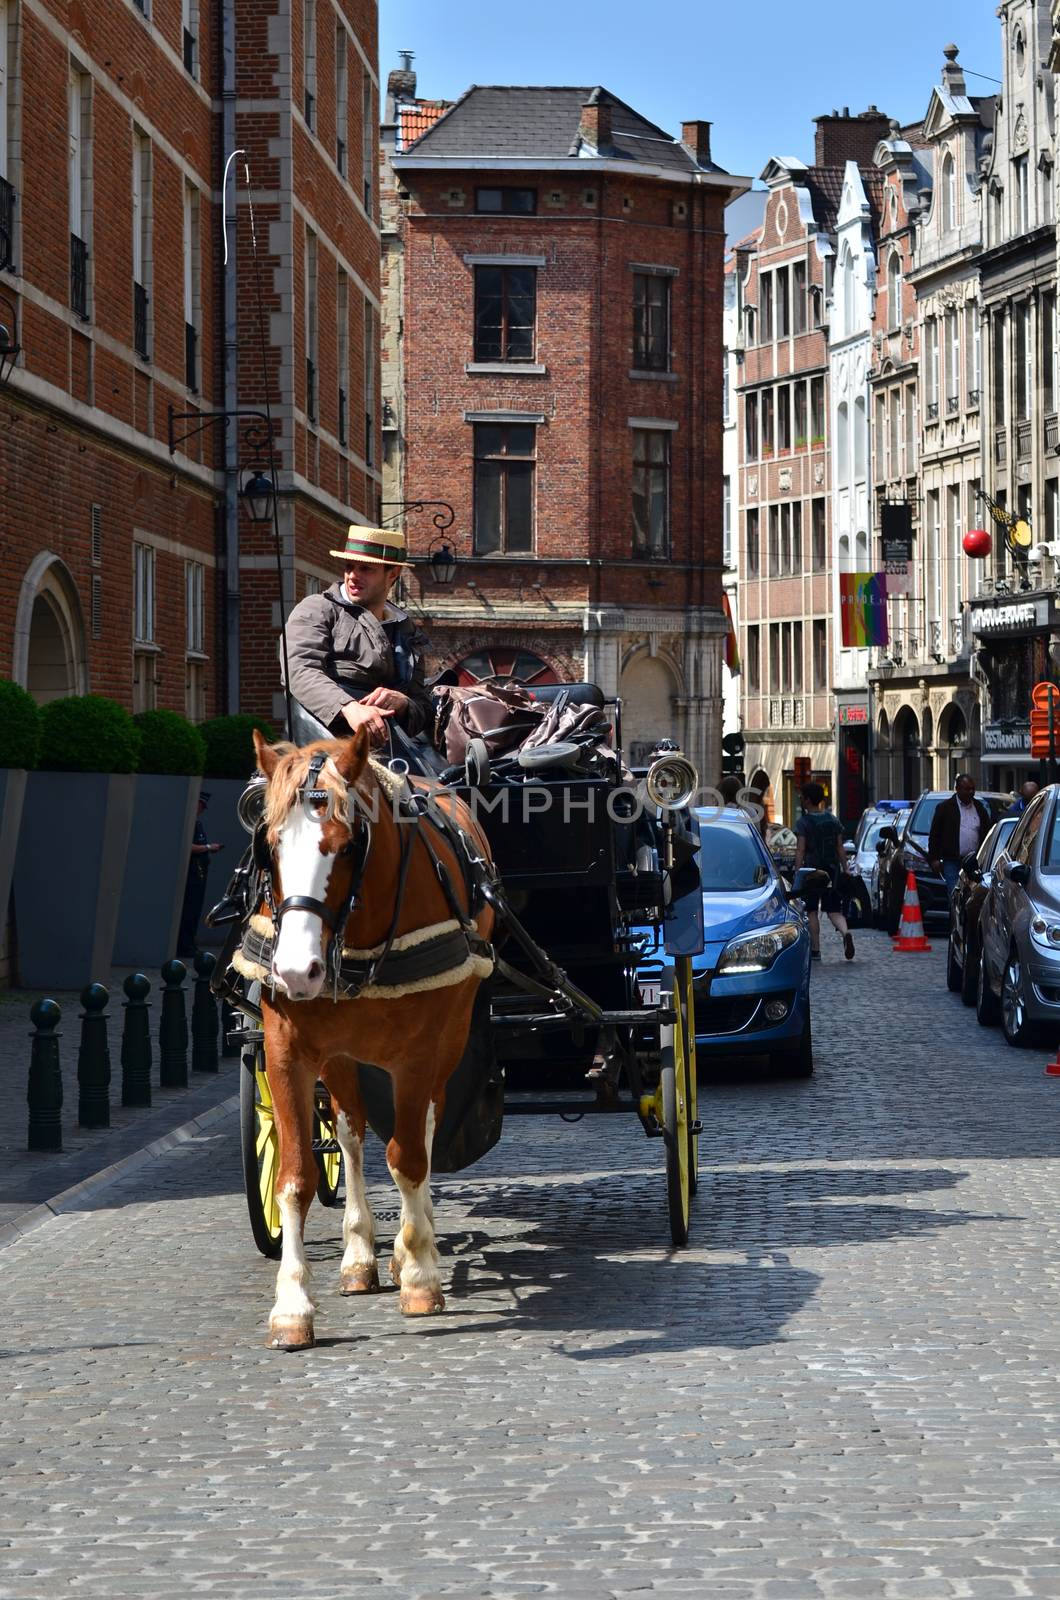 Brussels, Belgium - May 12, 2015: Driver in traditional horse carriage around the city of Brussels. by siraanamwong